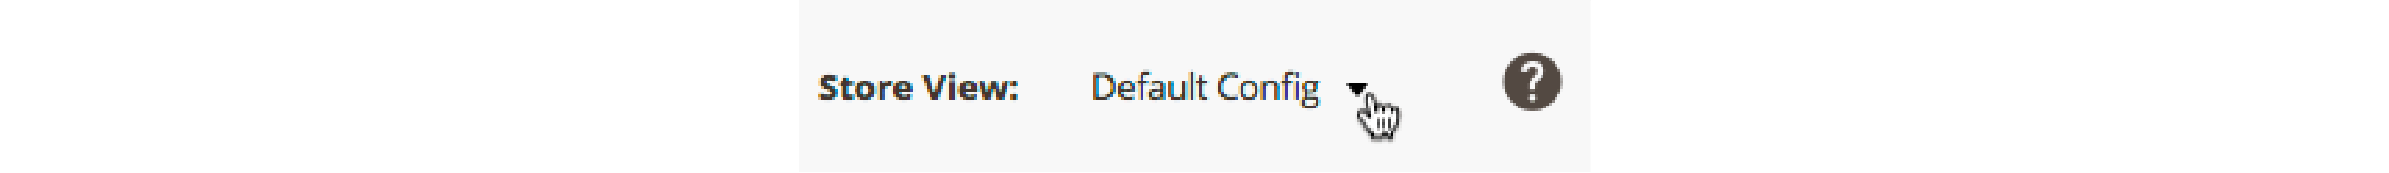 Selecting default configuration for Mailchimp in Magento